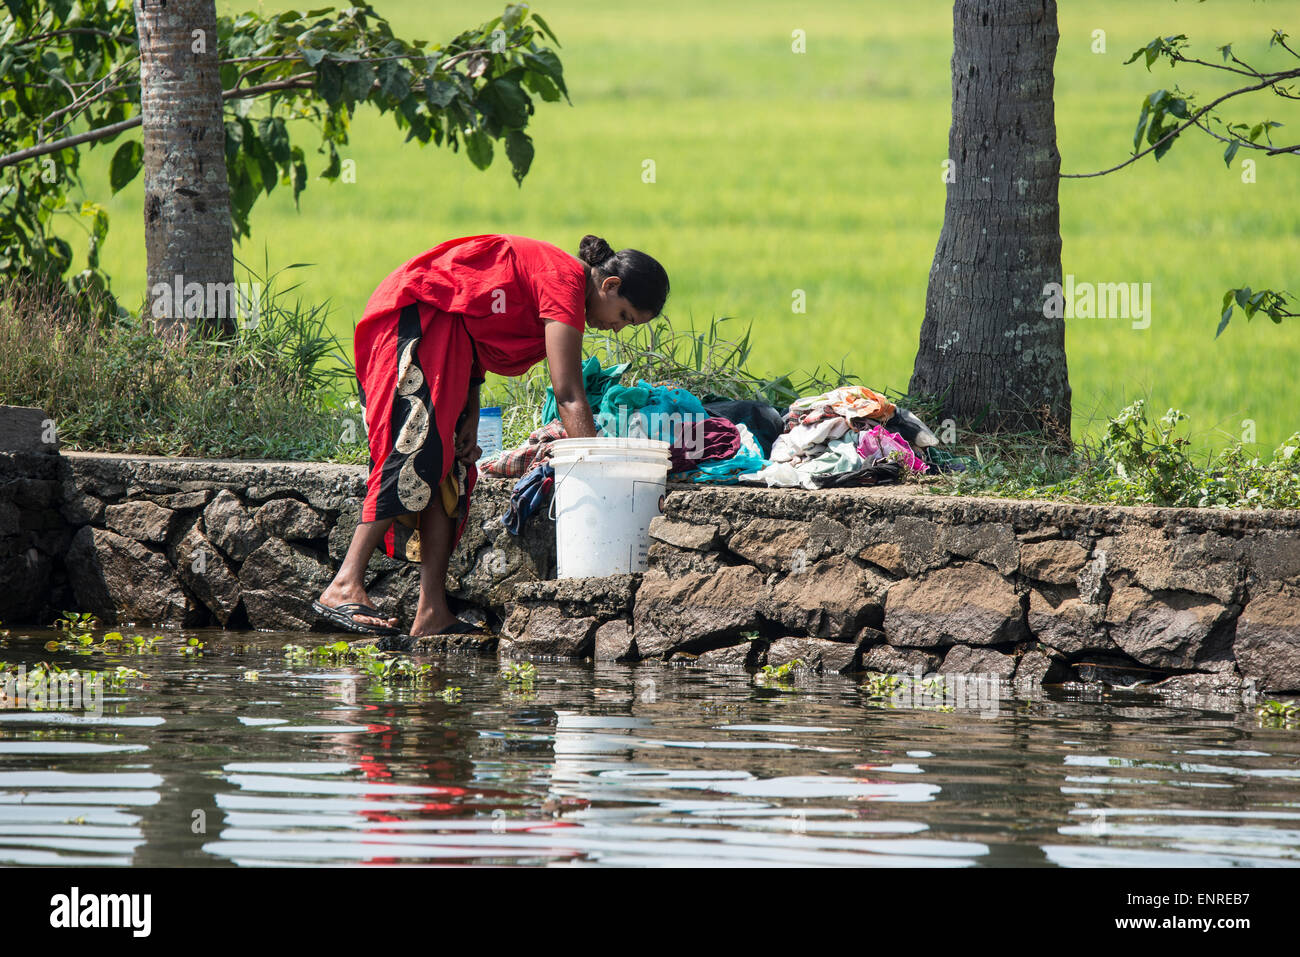 https://c8.alamy.com/comp/ENREB7/a-villager-washing-her-laundry-in-the-backwaters-of-kerala-in-south-ENREB7.jpg